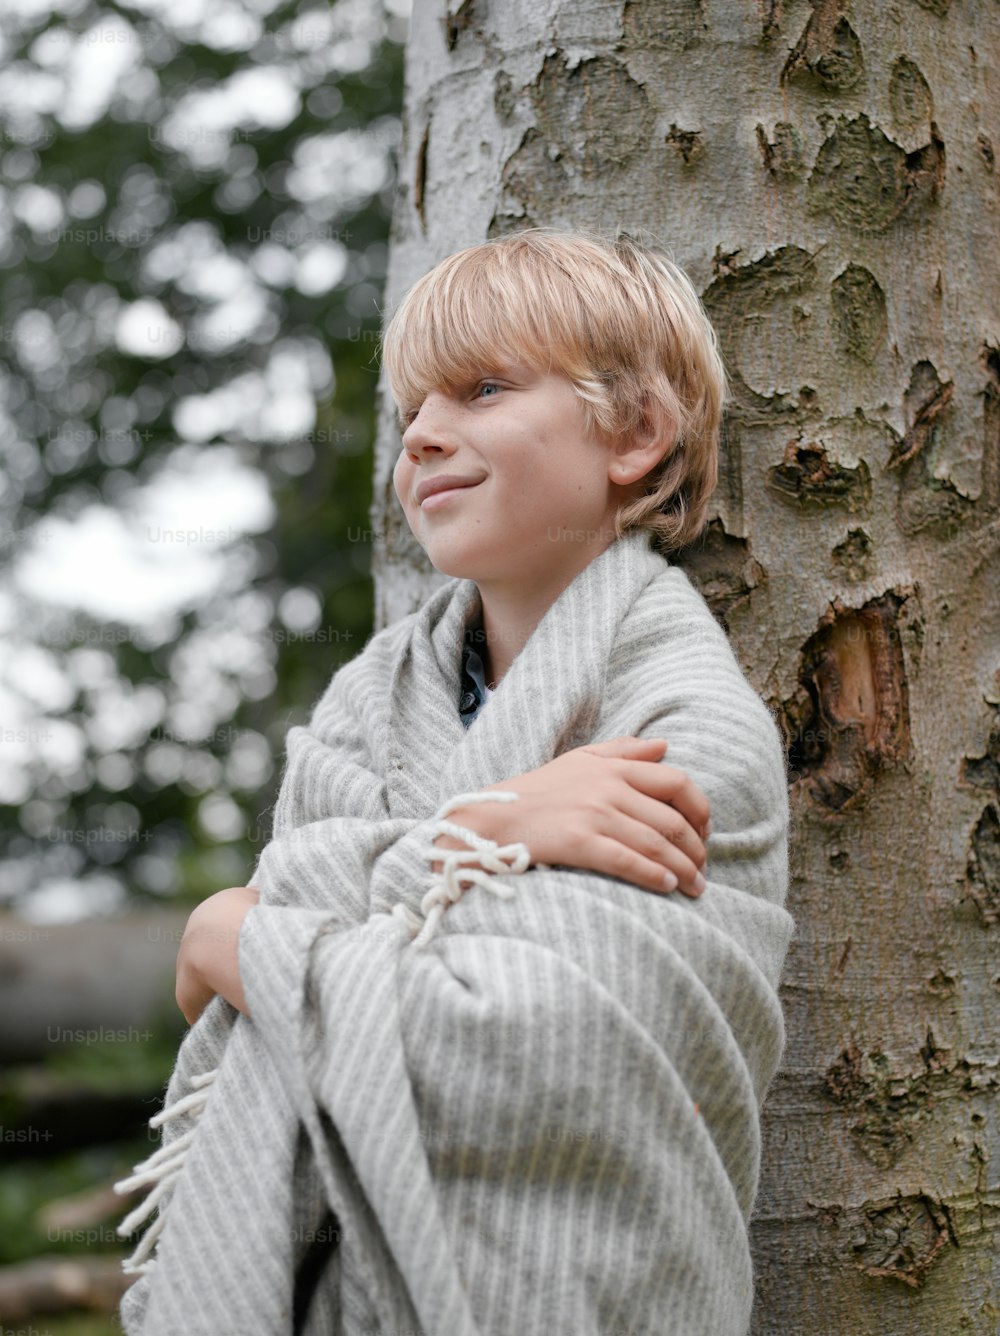 a young boy wrapped in a blanket leaning against a tree